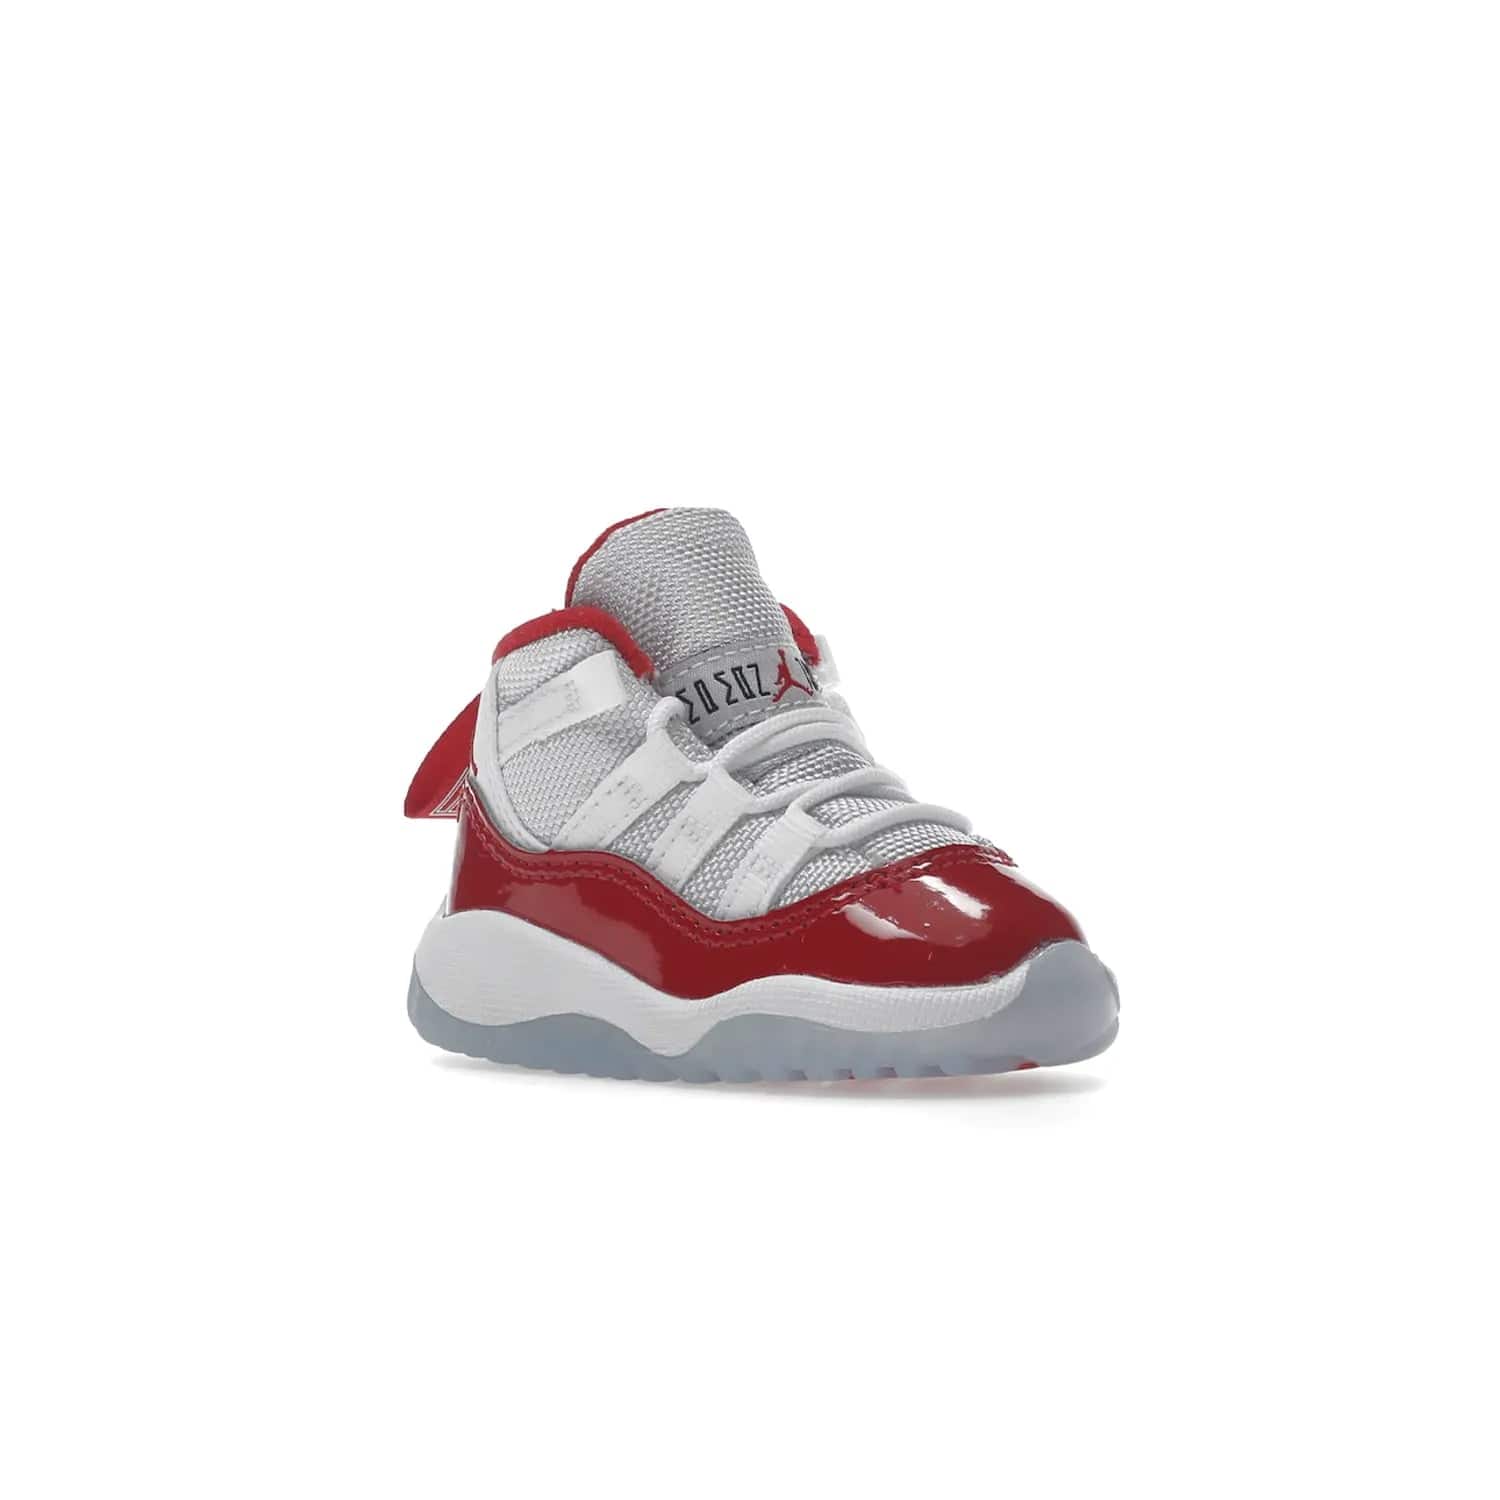 Jordan 11 Retro Cherry (2022) (TD) - Image 5 - Only at www.BallersClubKickz.com - Timeless classic. Air Jordan 11 Retro Cherry 2022 TD combines mesh, leather & suede for a unique look. White upper with varsity red suede. Jumpman logo on collar & tongue. Available Dec 10th, priced at $80.